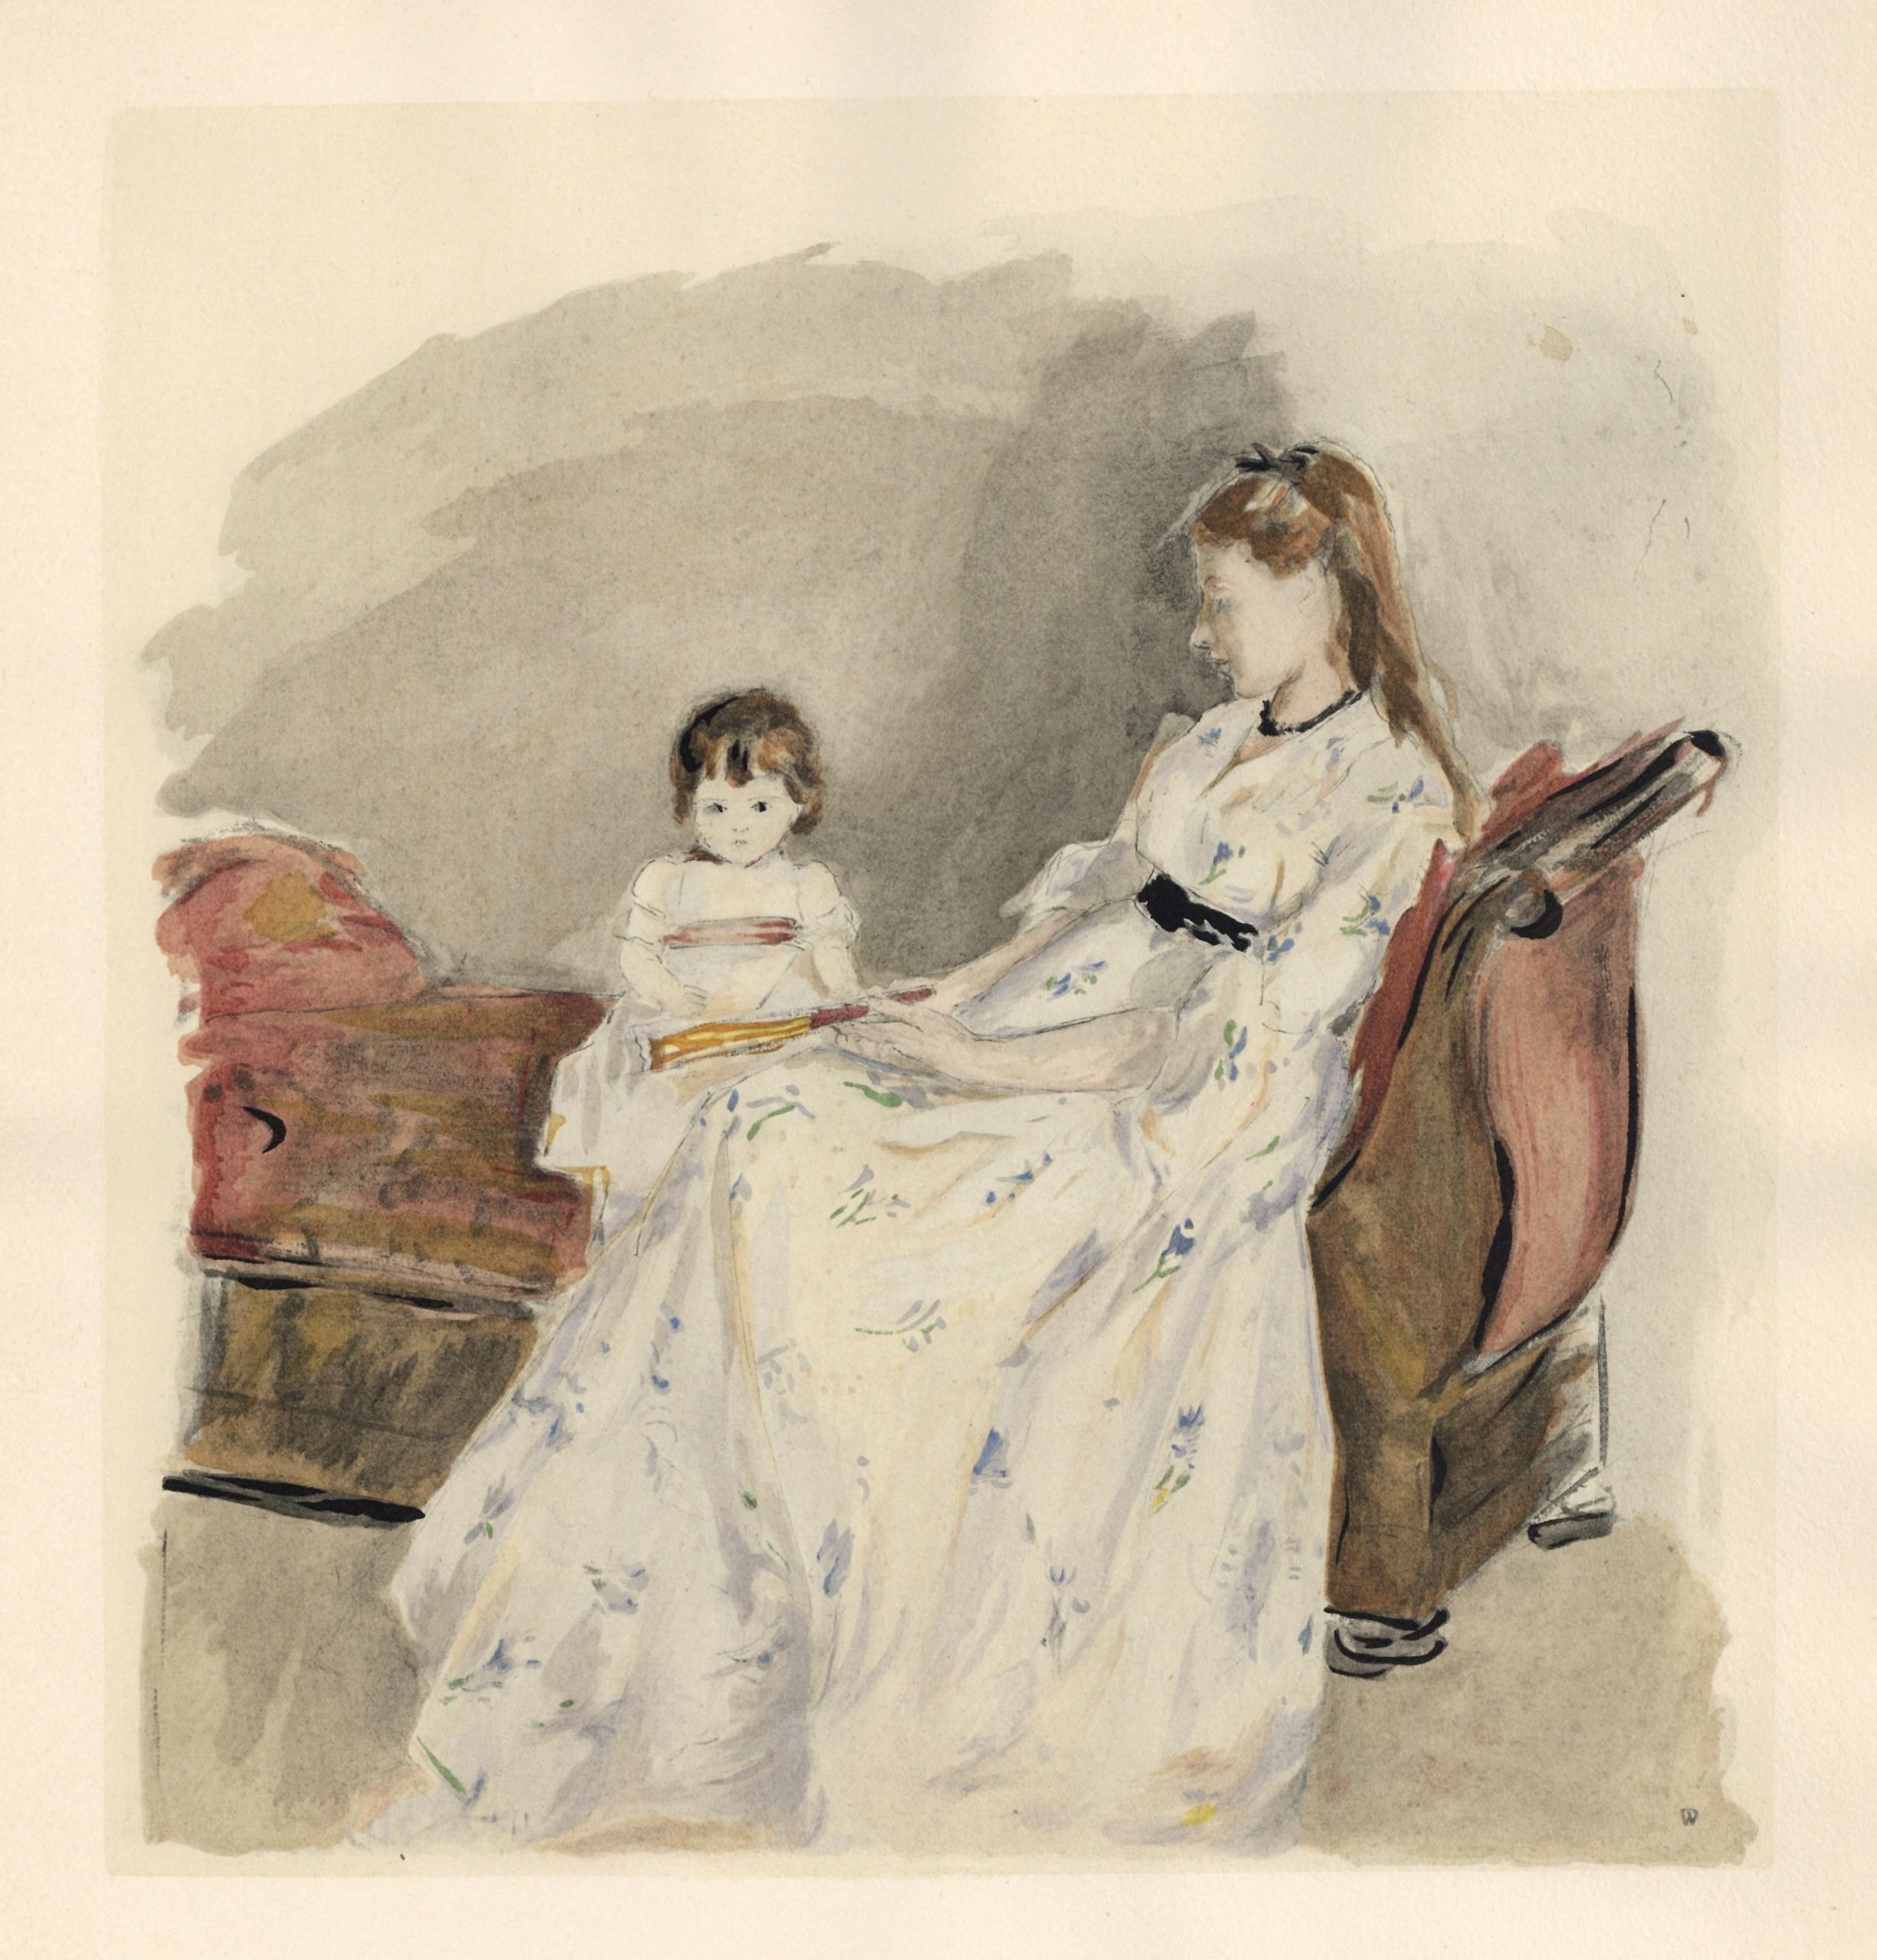 Medium: pochoir (after the 1872 watercolor). Printed 1946 in a limited edition of 300 for the rare "Berthe Morisot Seize Aquarelles" portfolio, published in Paris by Quatre Chemins. The image measures 9 3/4 x 9 inches (245 x 230 mm). The total sheet